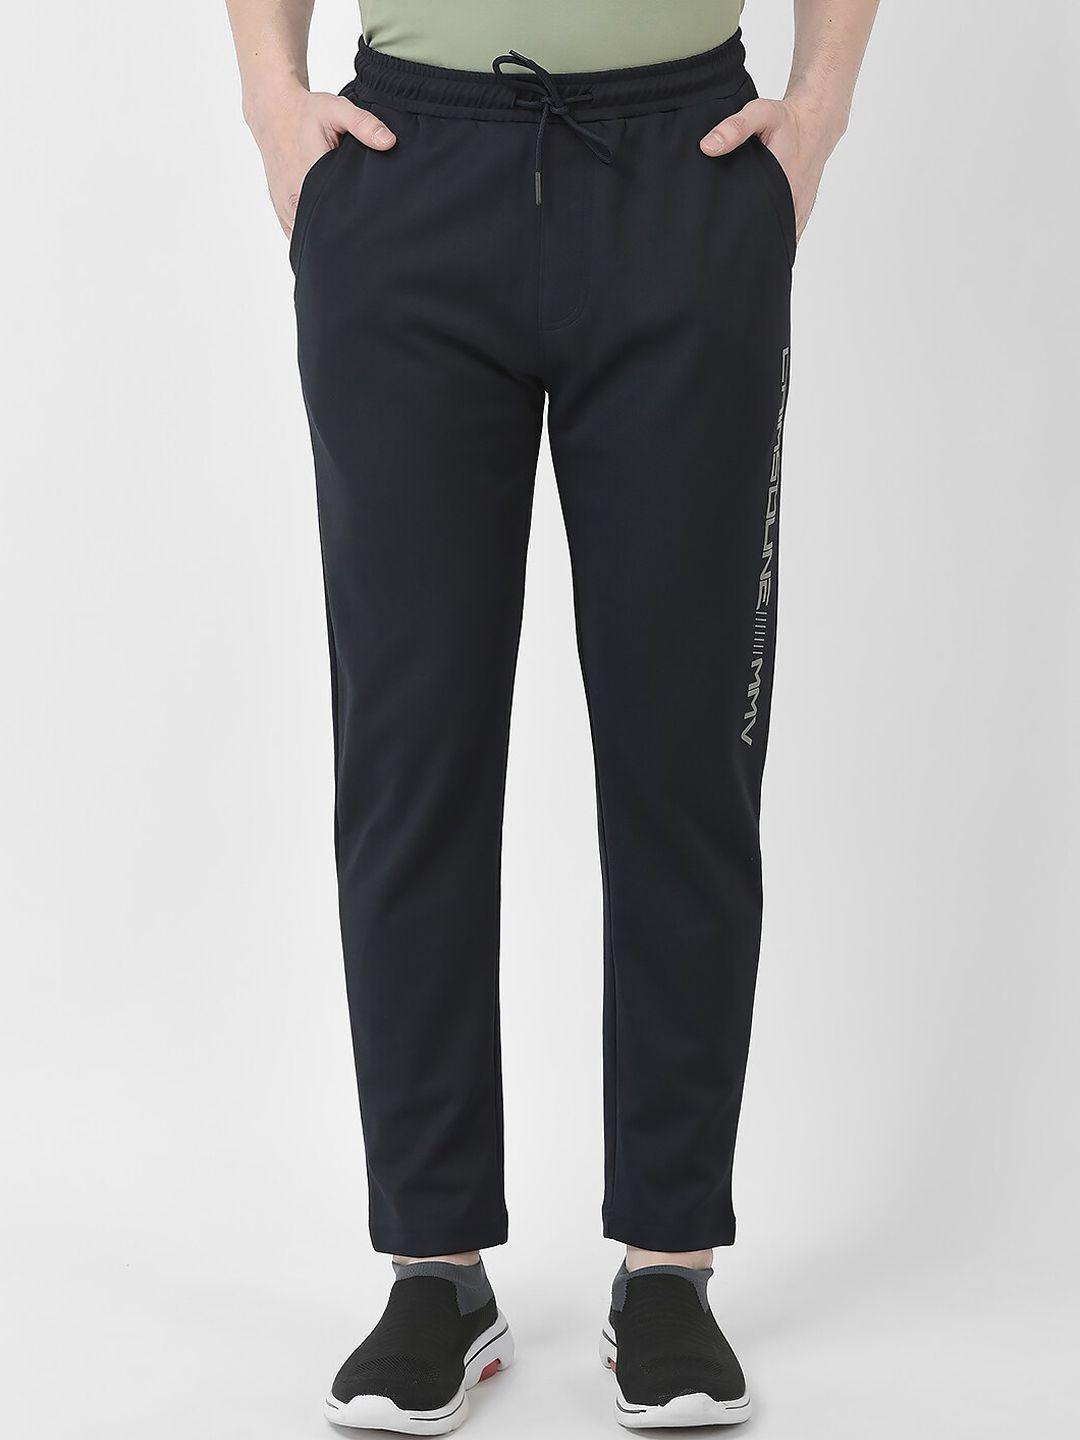 crimsoune-club-men-relaxed-fit-sports-track-pants